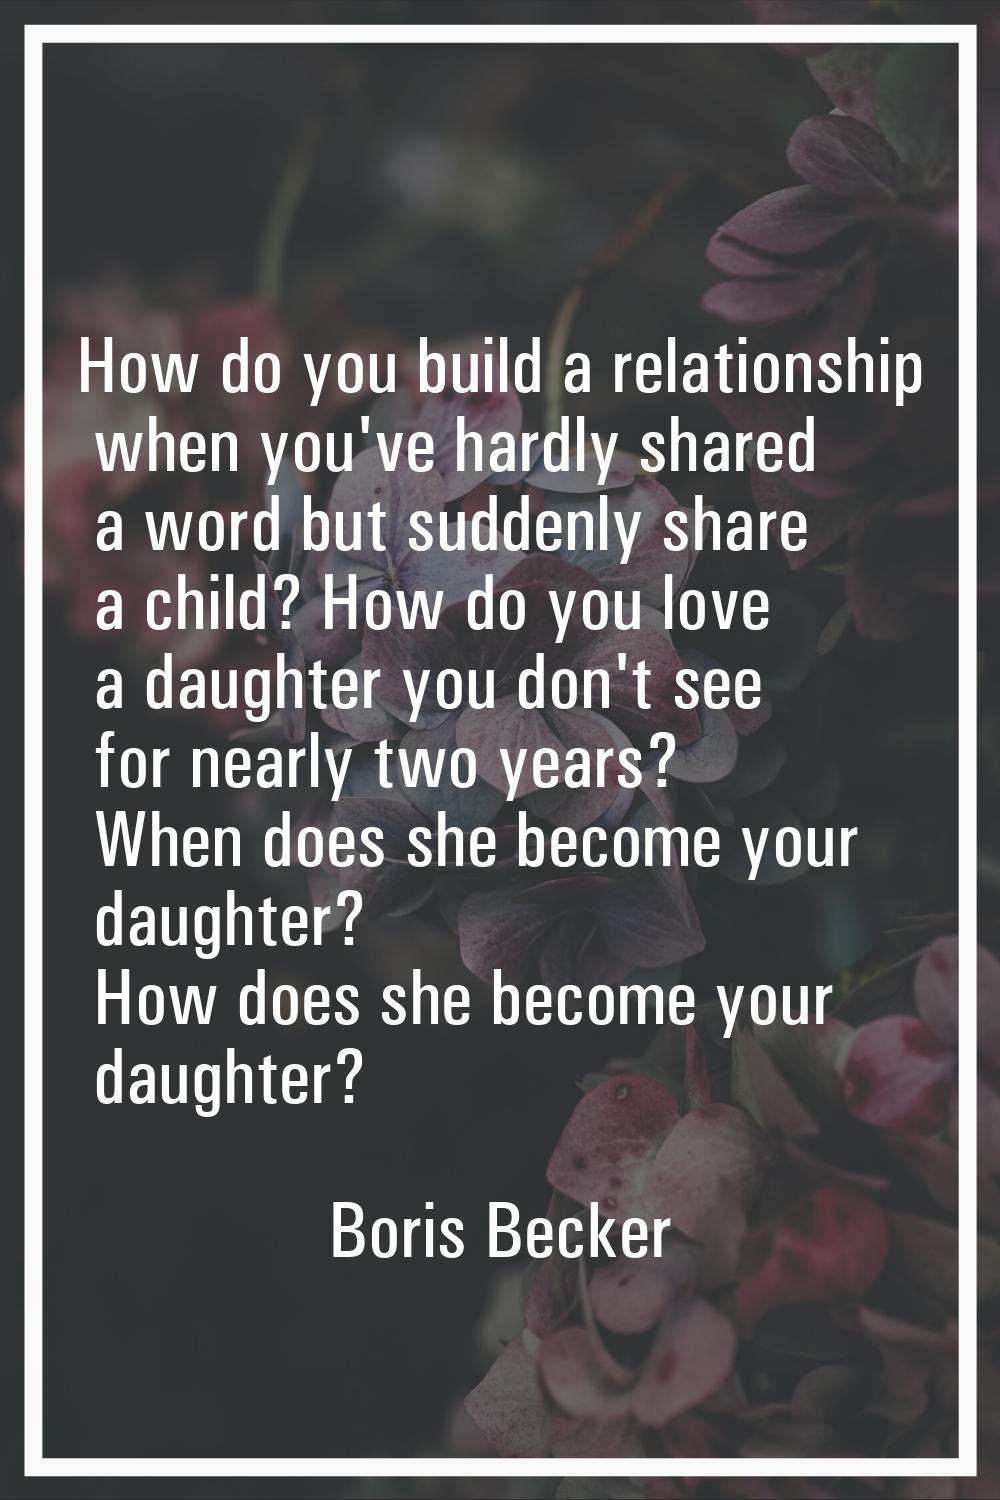 How do you build a relationship when you've hardly shared a word but suddenly share a child? How do